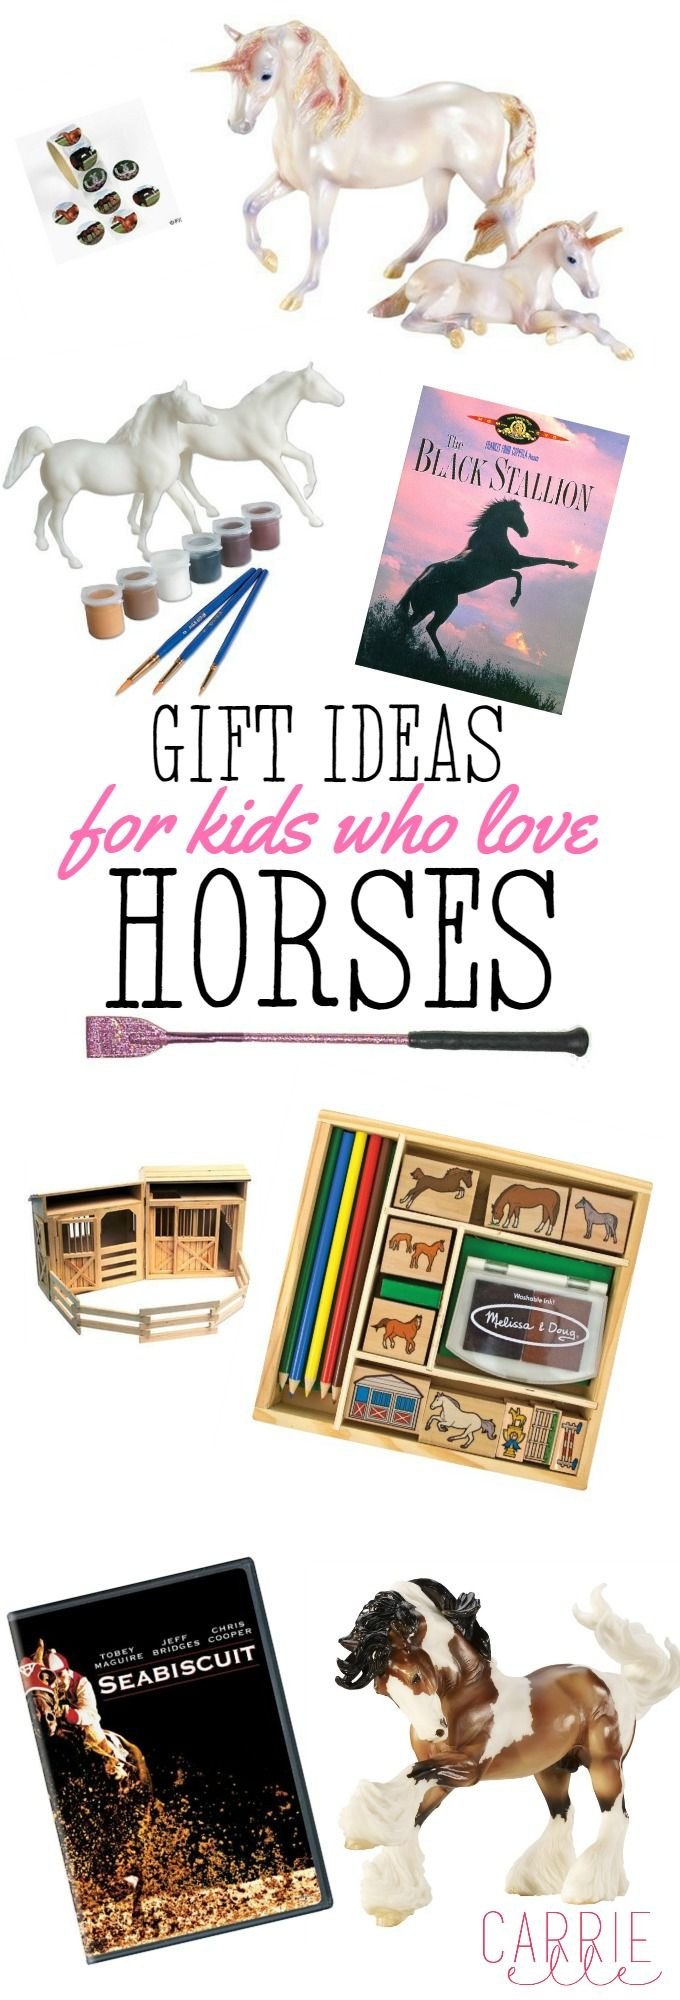 Horse Gift For Kids
 52 best Just Horse n Around images on Pinterest